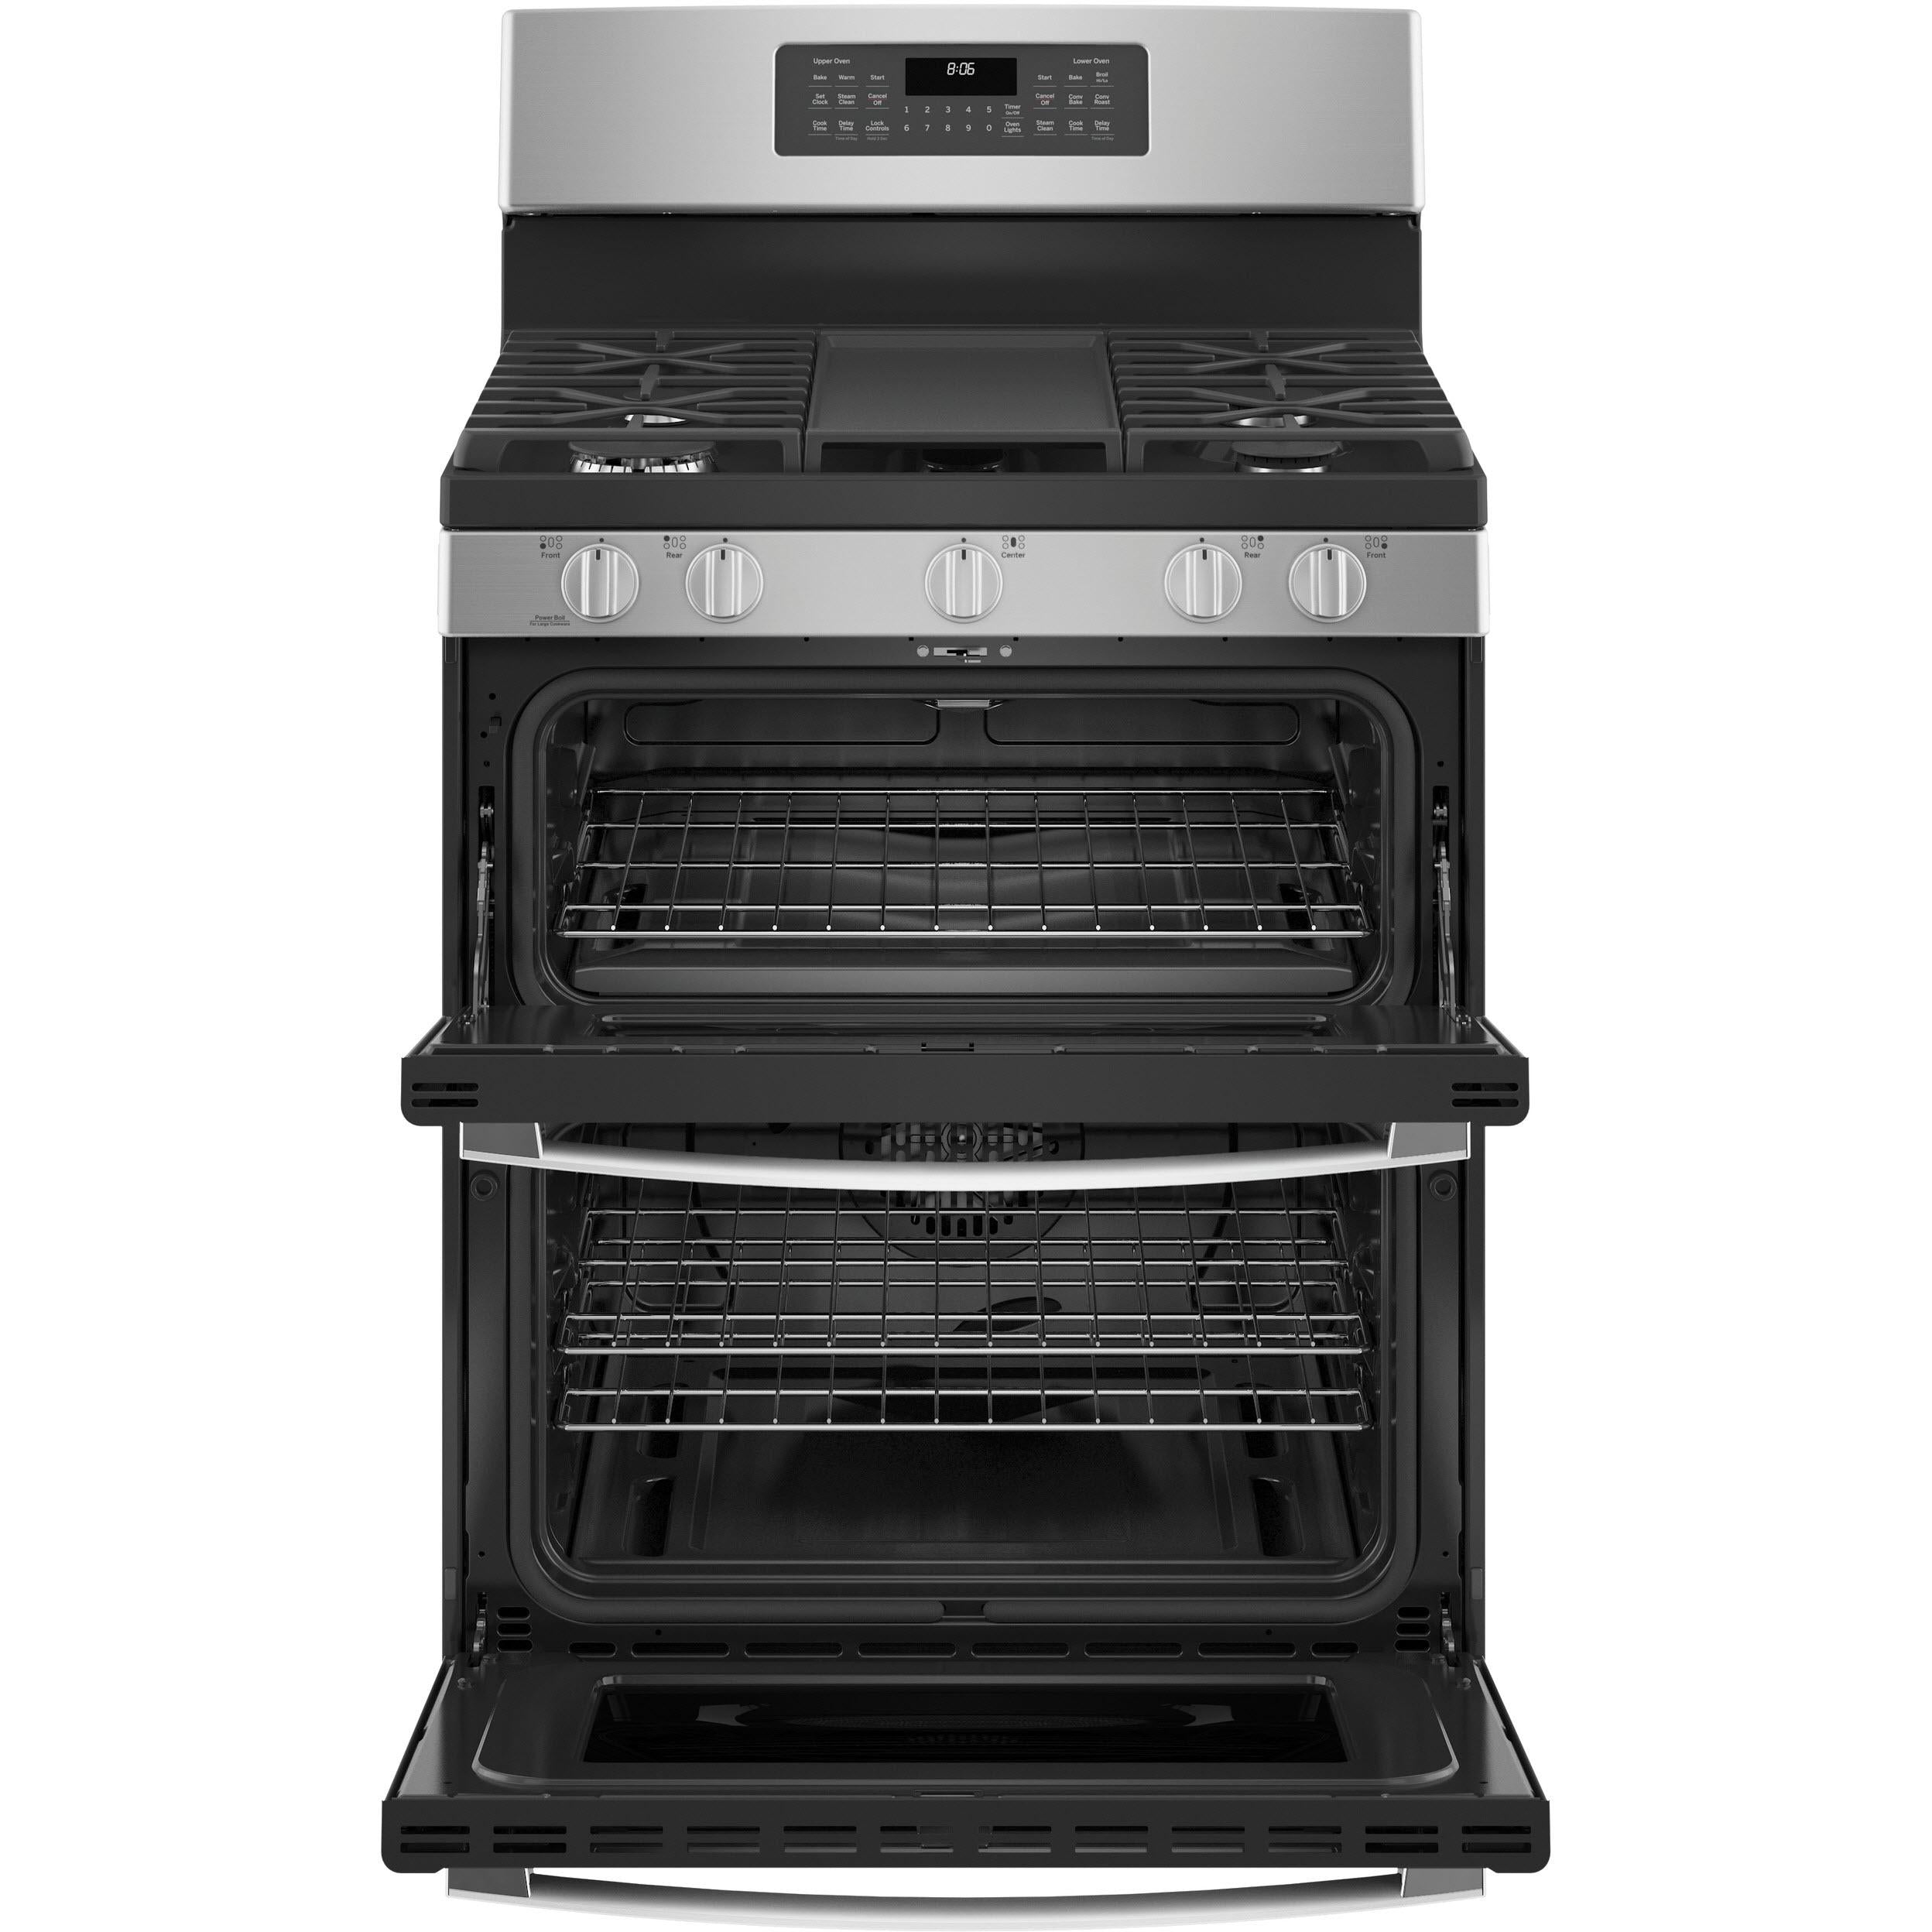 GE 30-inch Freestanding Gas Range with Convection Technology JGBS86SPSS